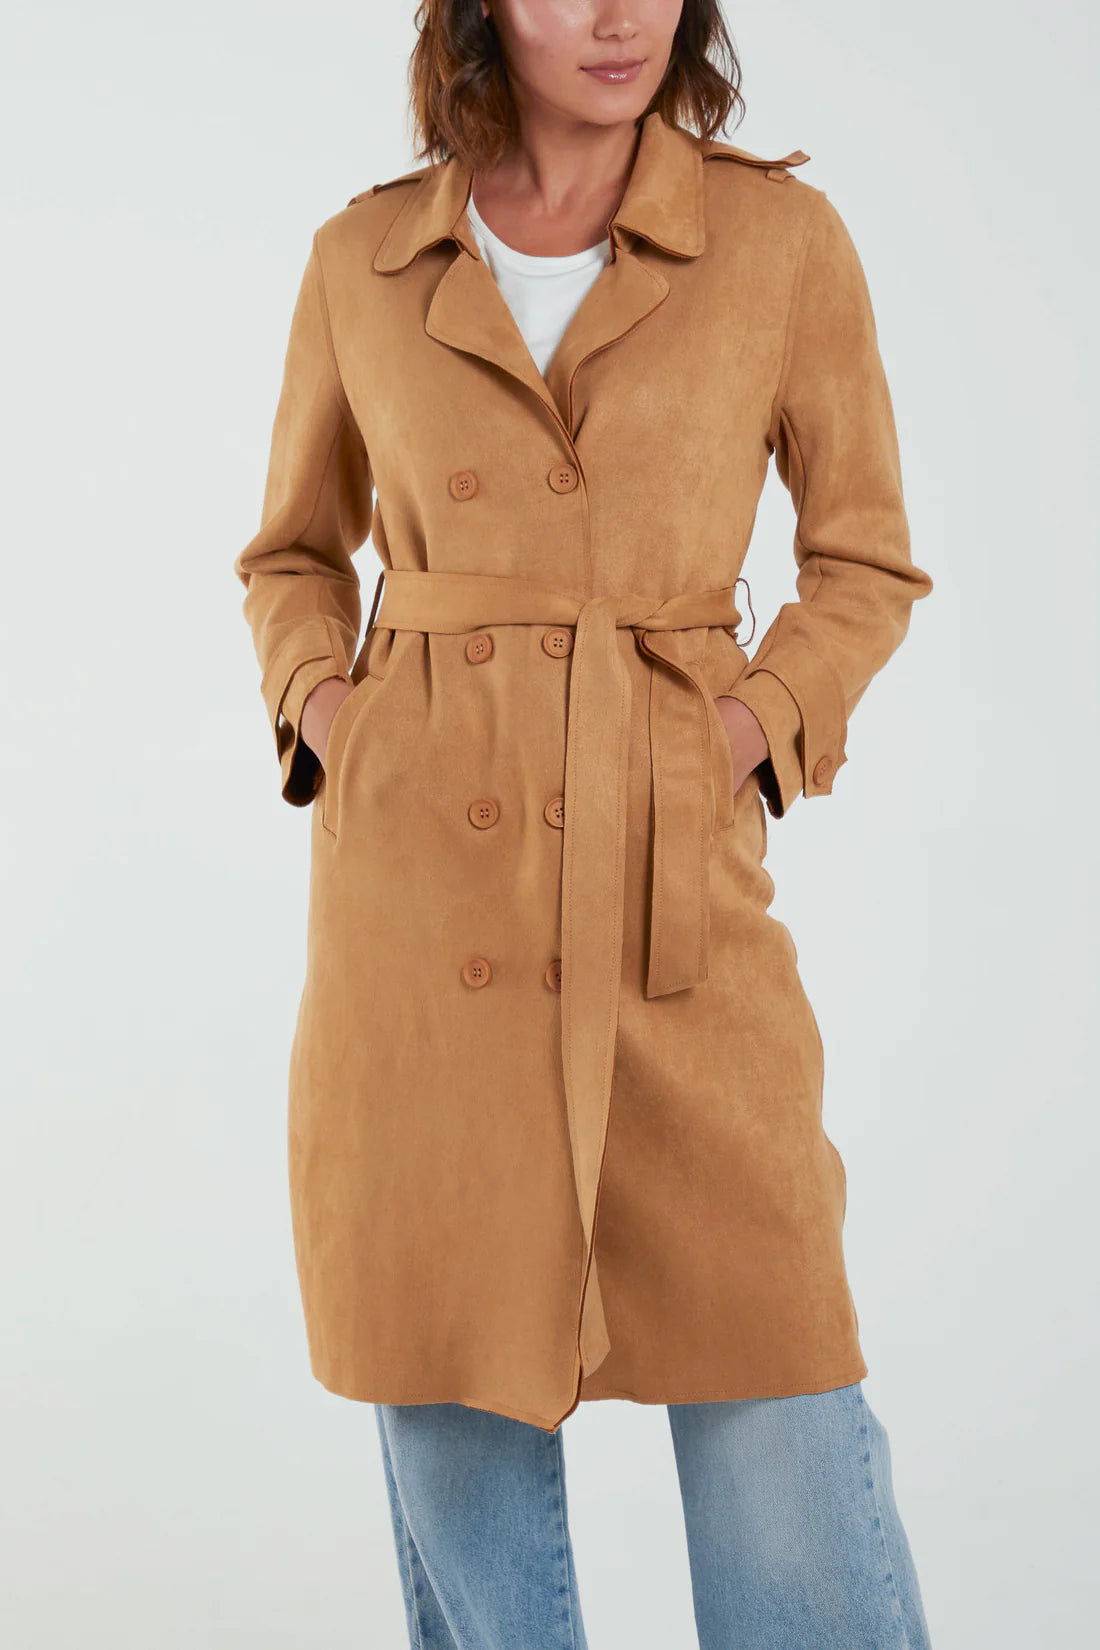 Becca Faux Suede Trench Coat - Light Camel